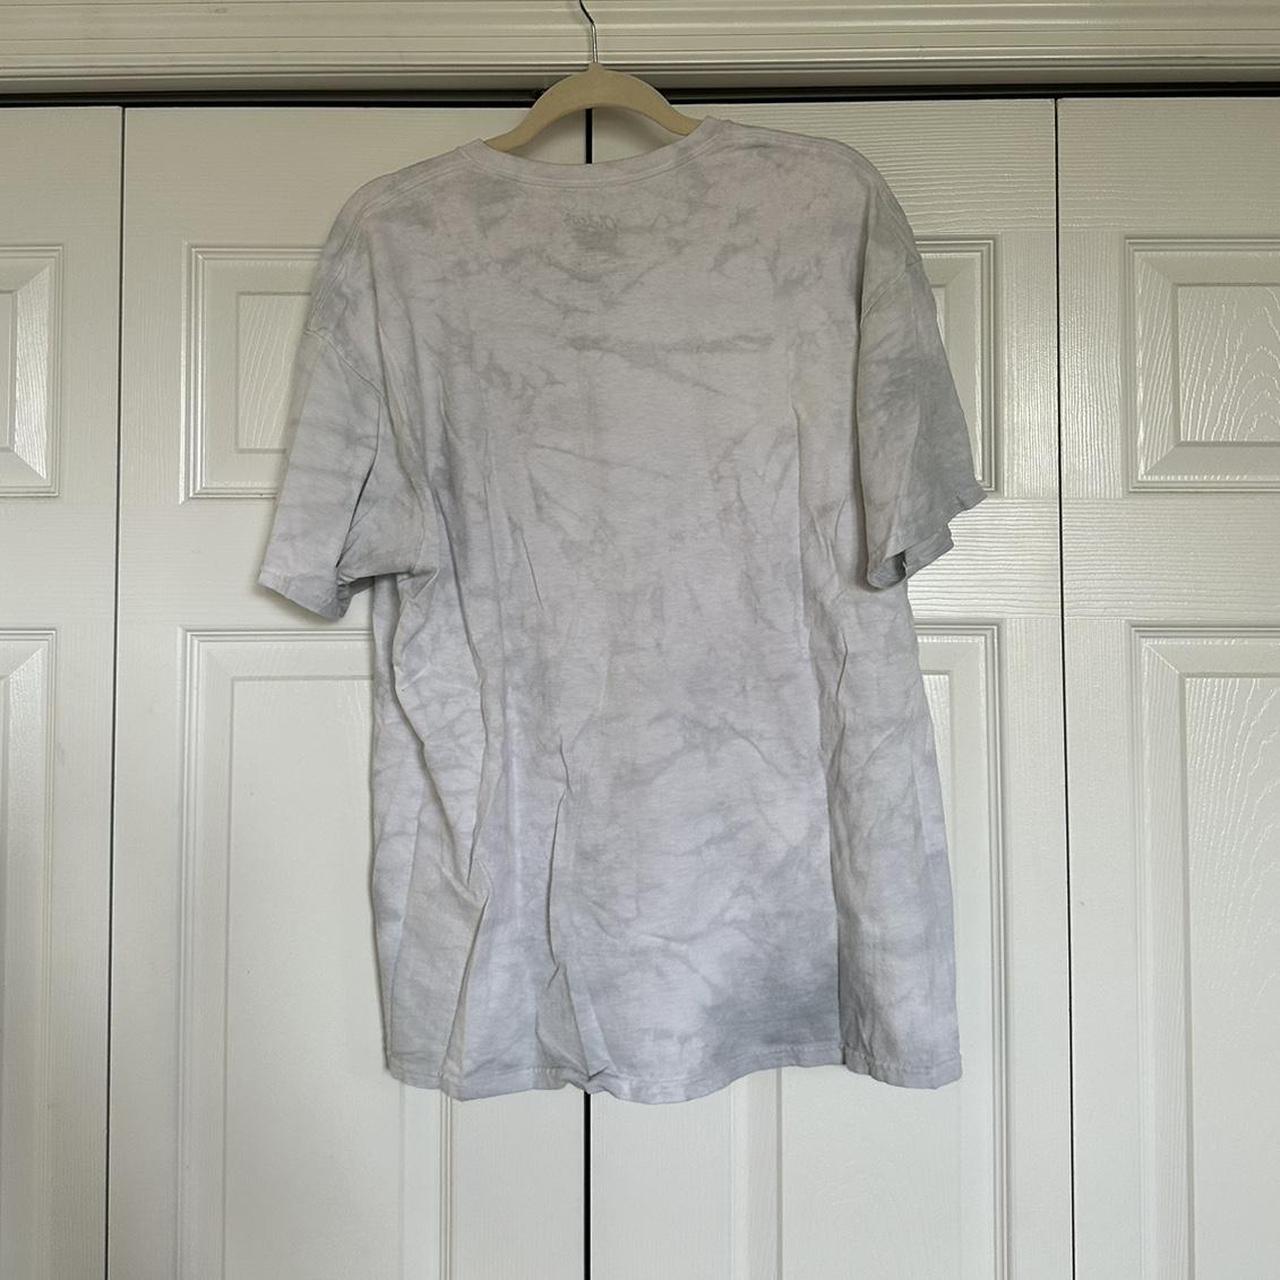 PacSun Women's Grey and White T-shirt (4)